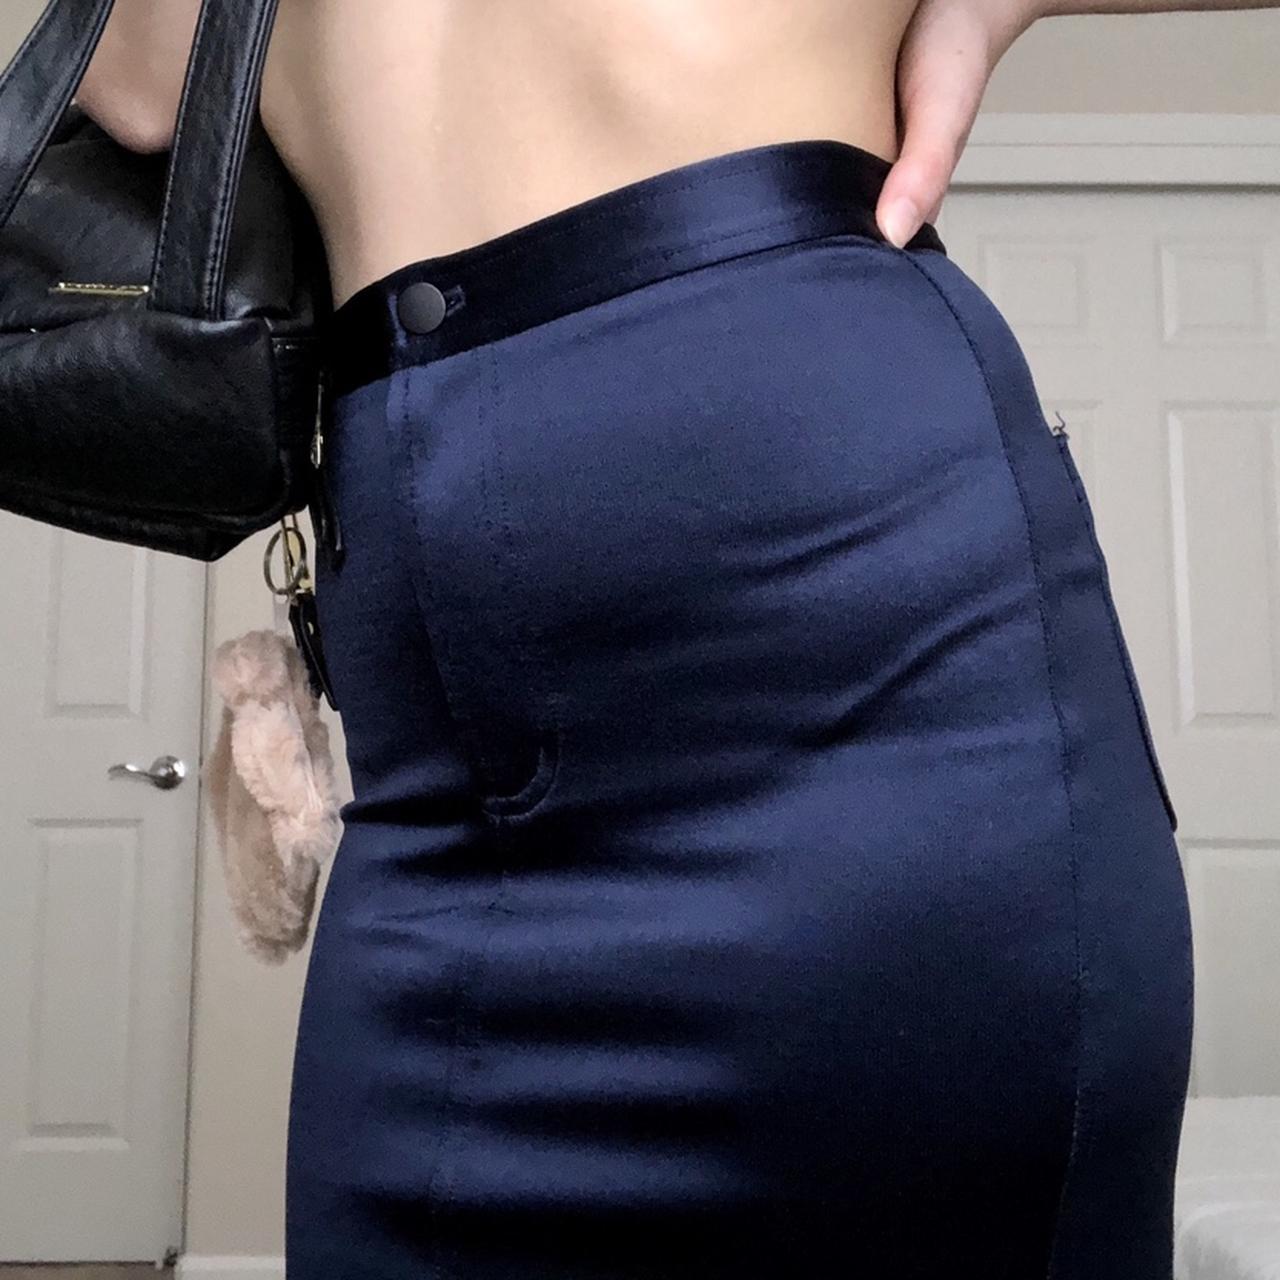 American Apparel Disco Pants in Black Royal Blue  Turquoise Teal  How To  Style  YouTube